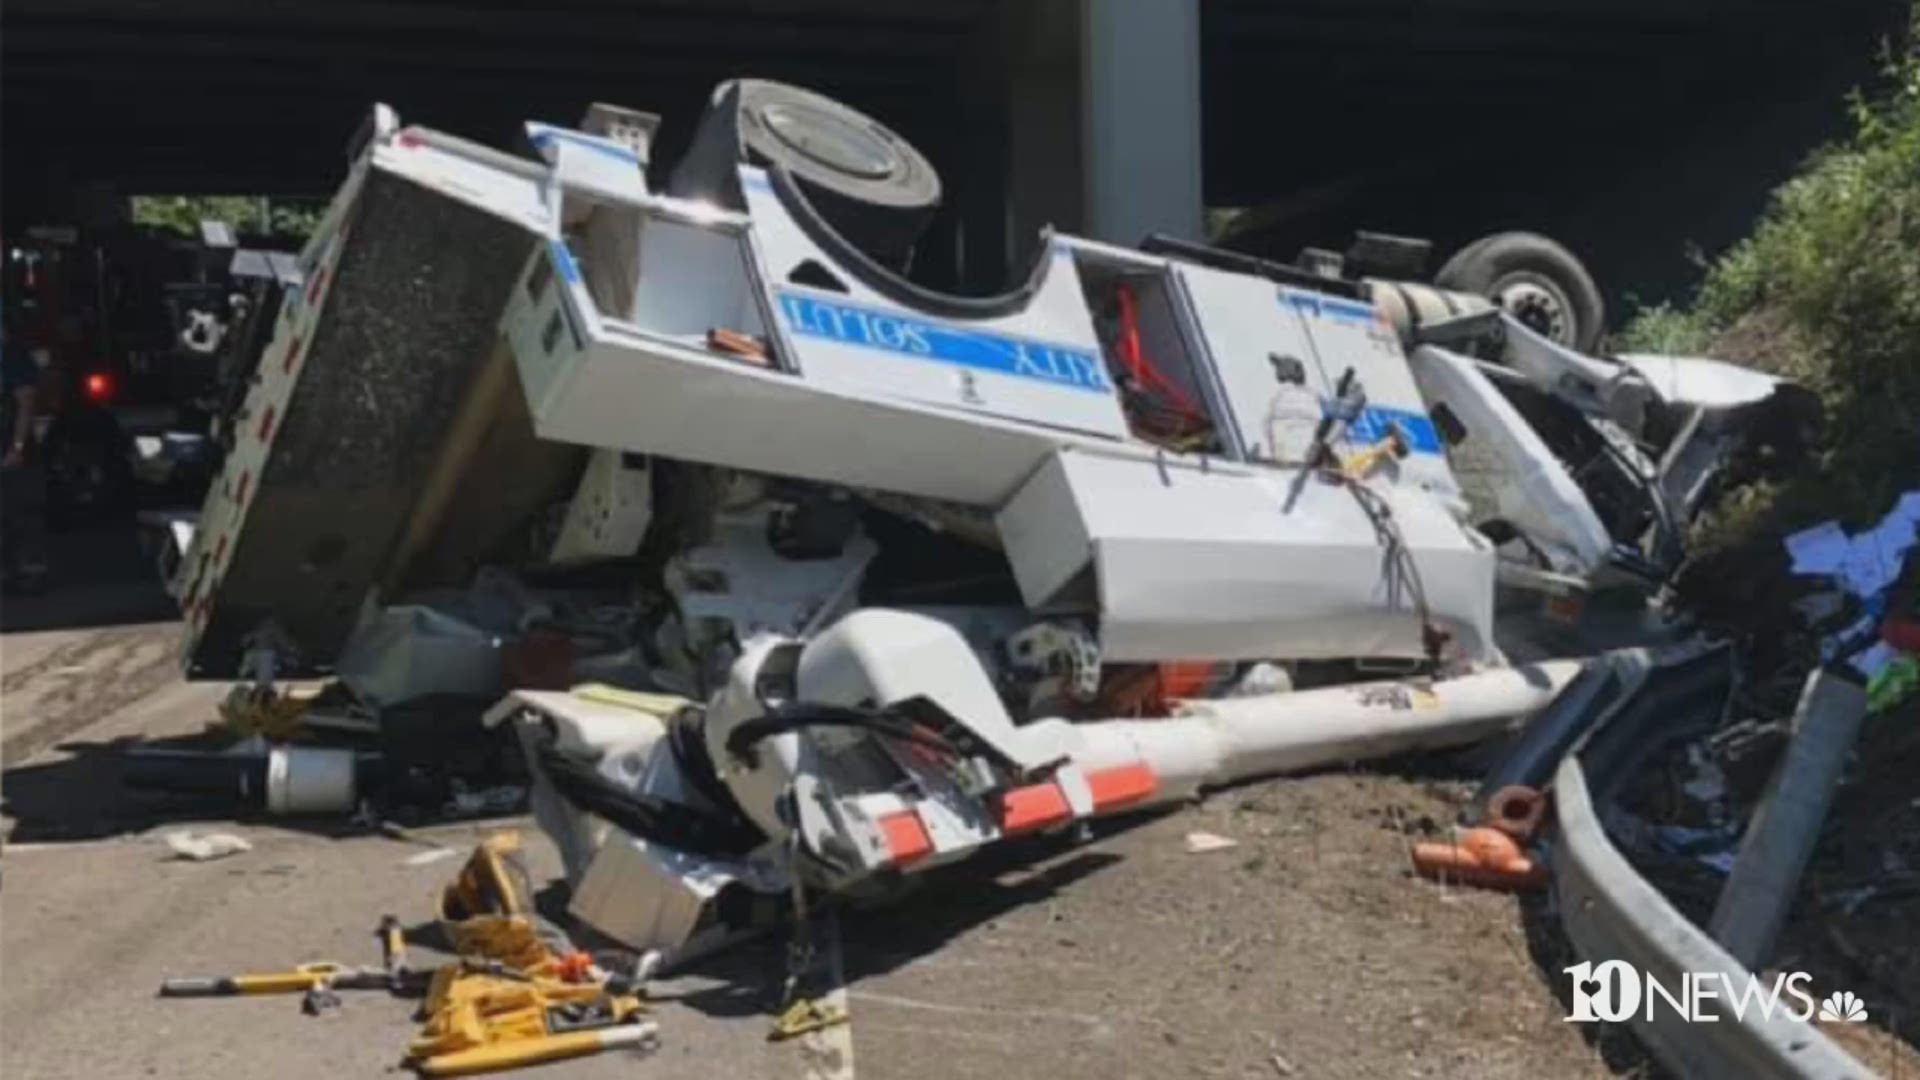 A Pike Electric Company truck out of Indiana was traveling down the interstate when it left the roadway and crashed, police said.